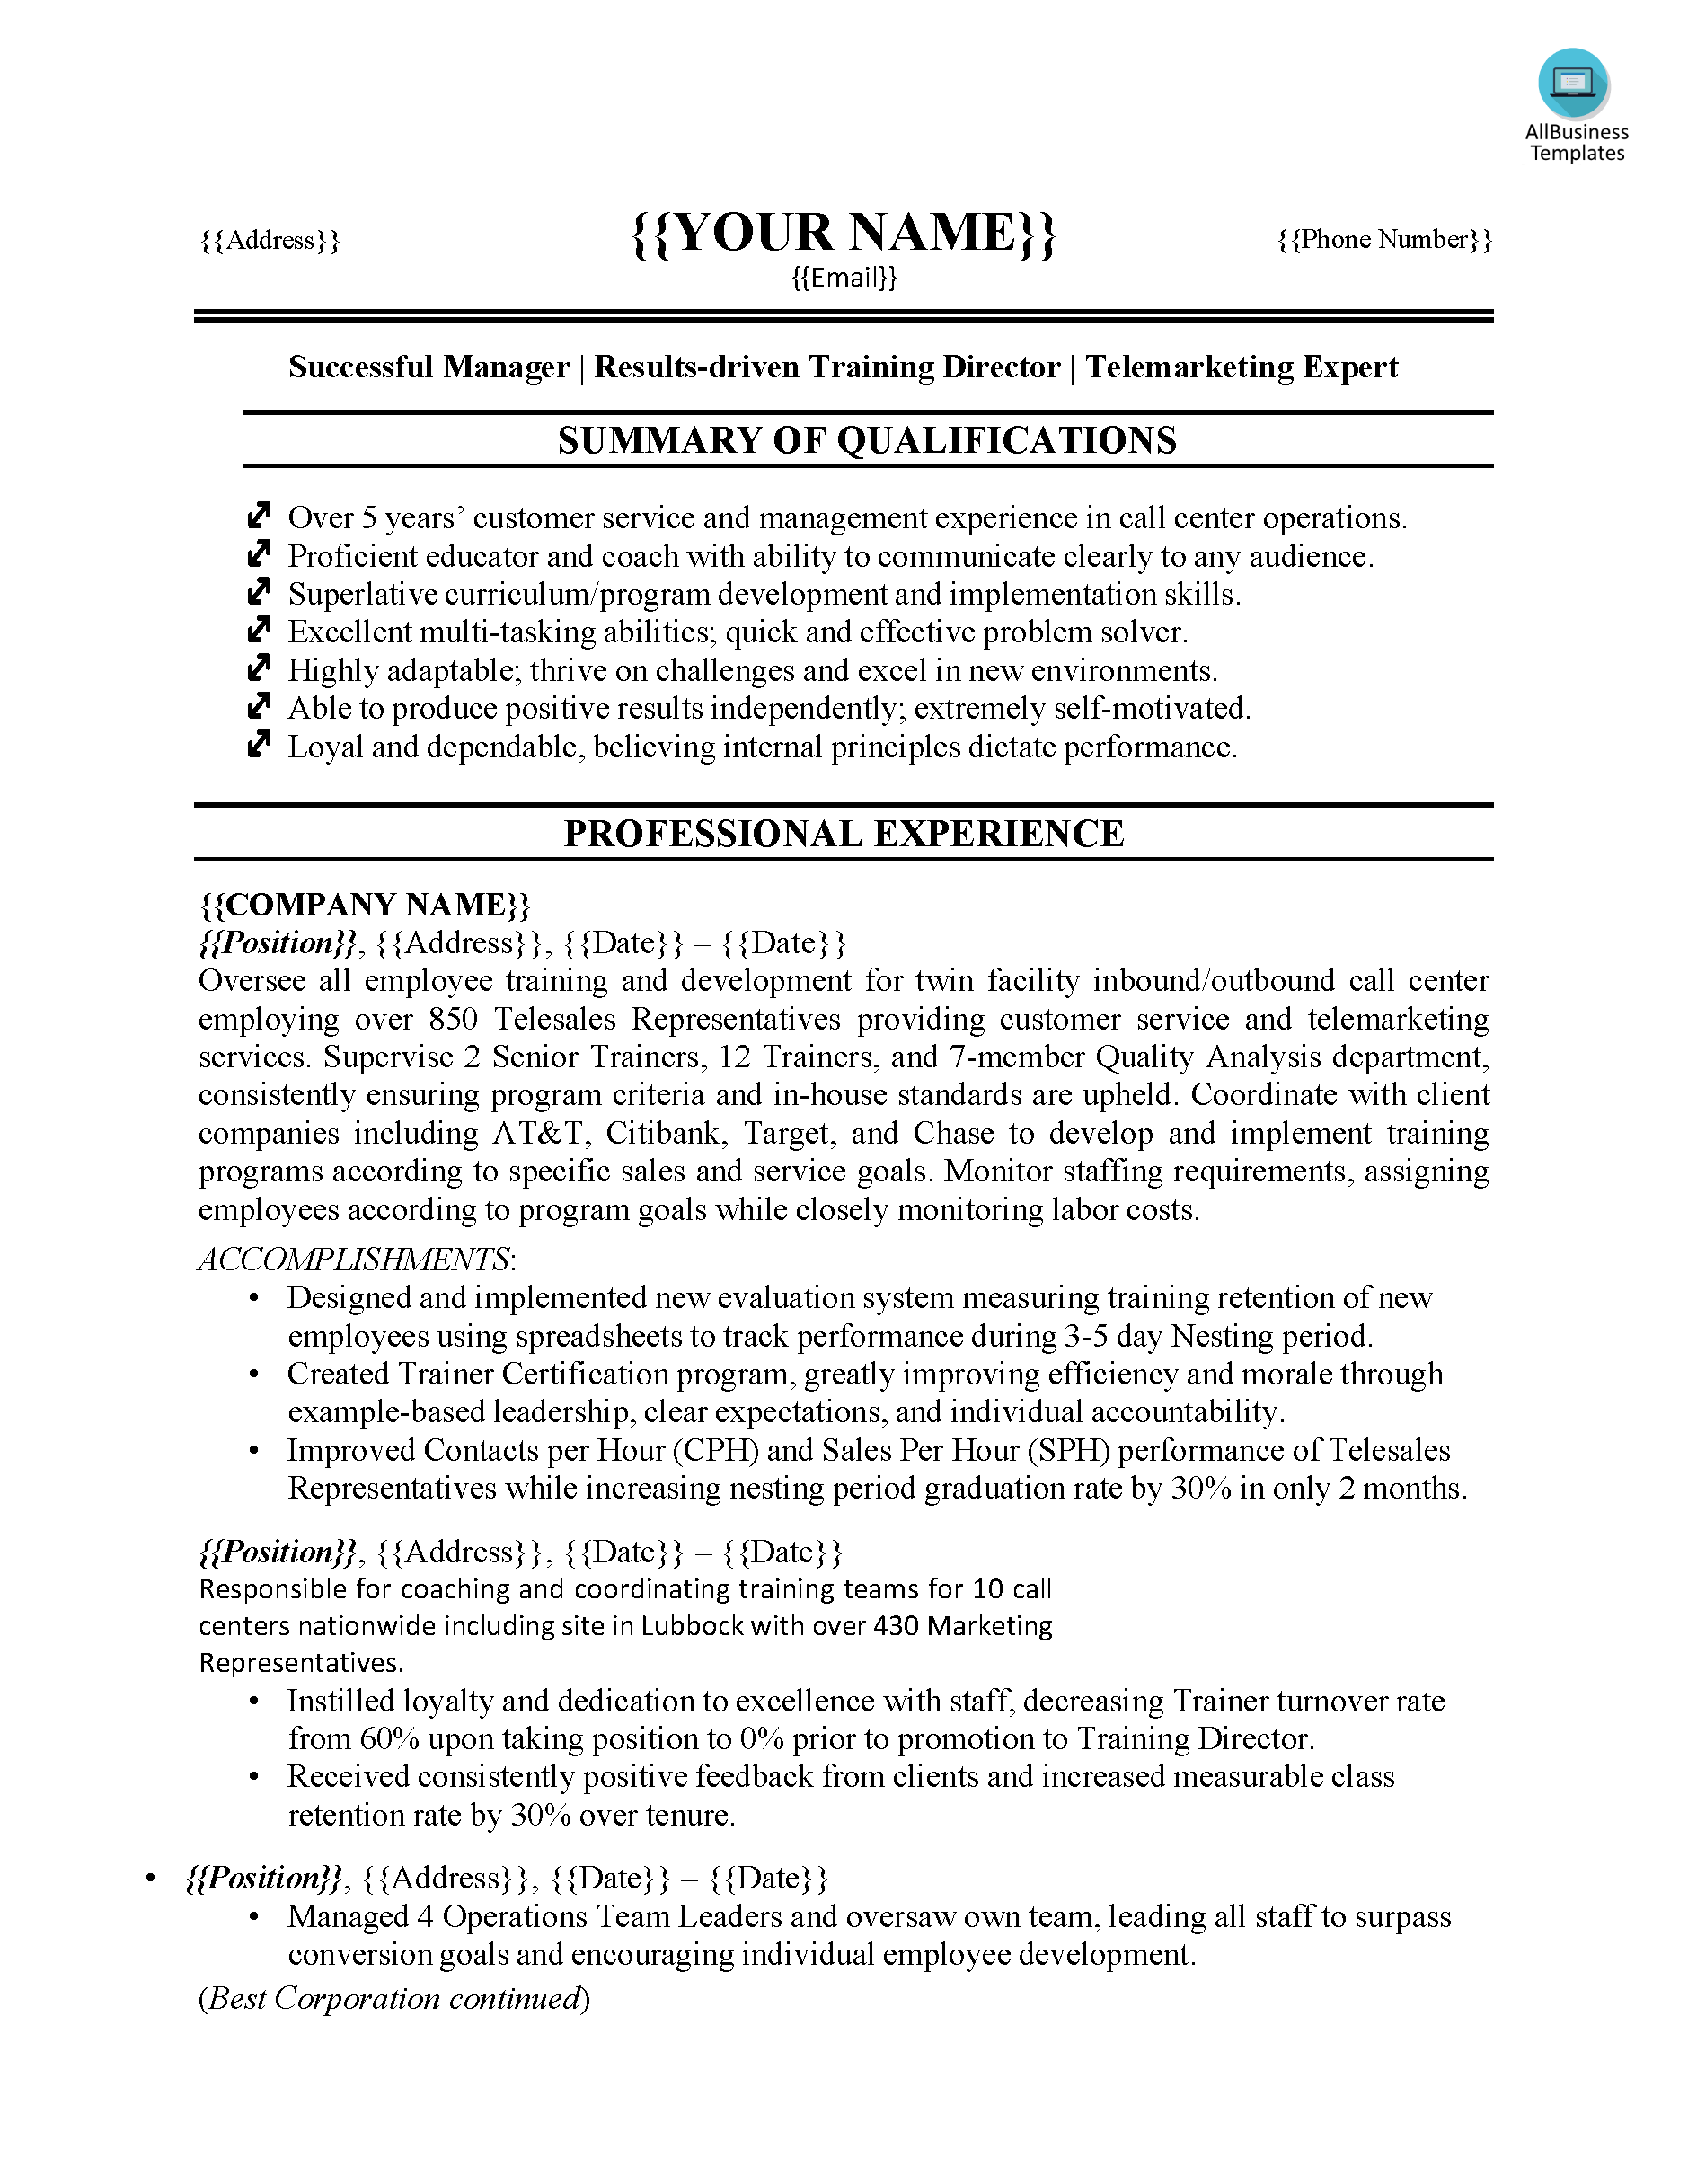 what is a good summary for customer service resume